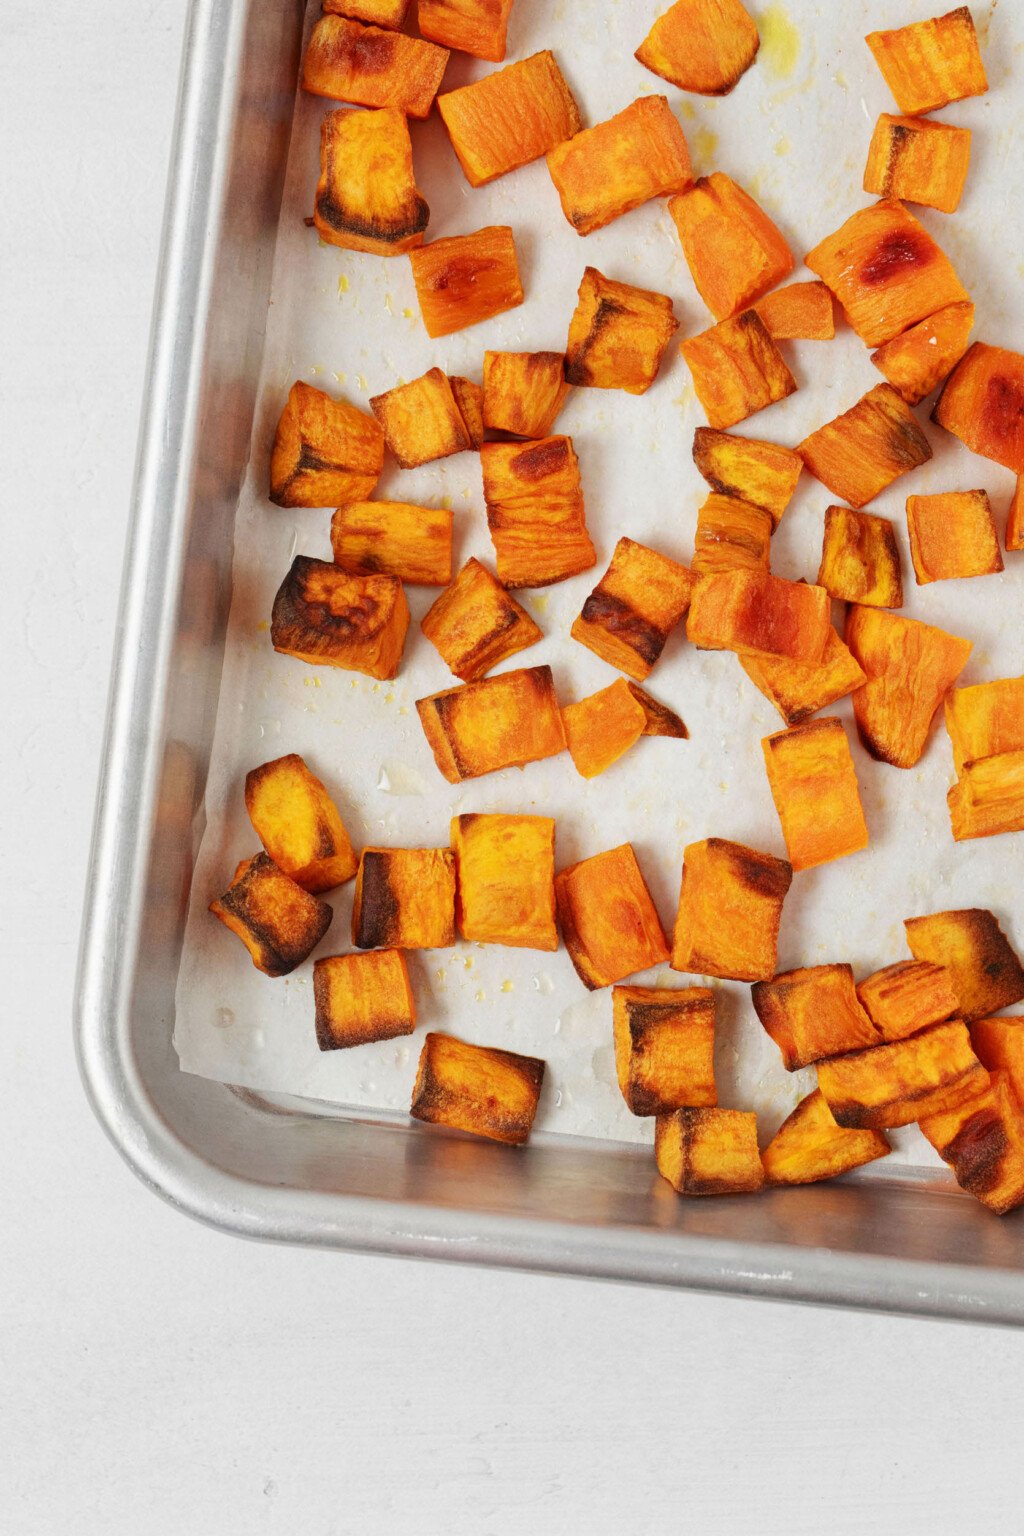 Cubed, roasted sweet potatoes are pictured on a sheet of parchment on a roasting tray.